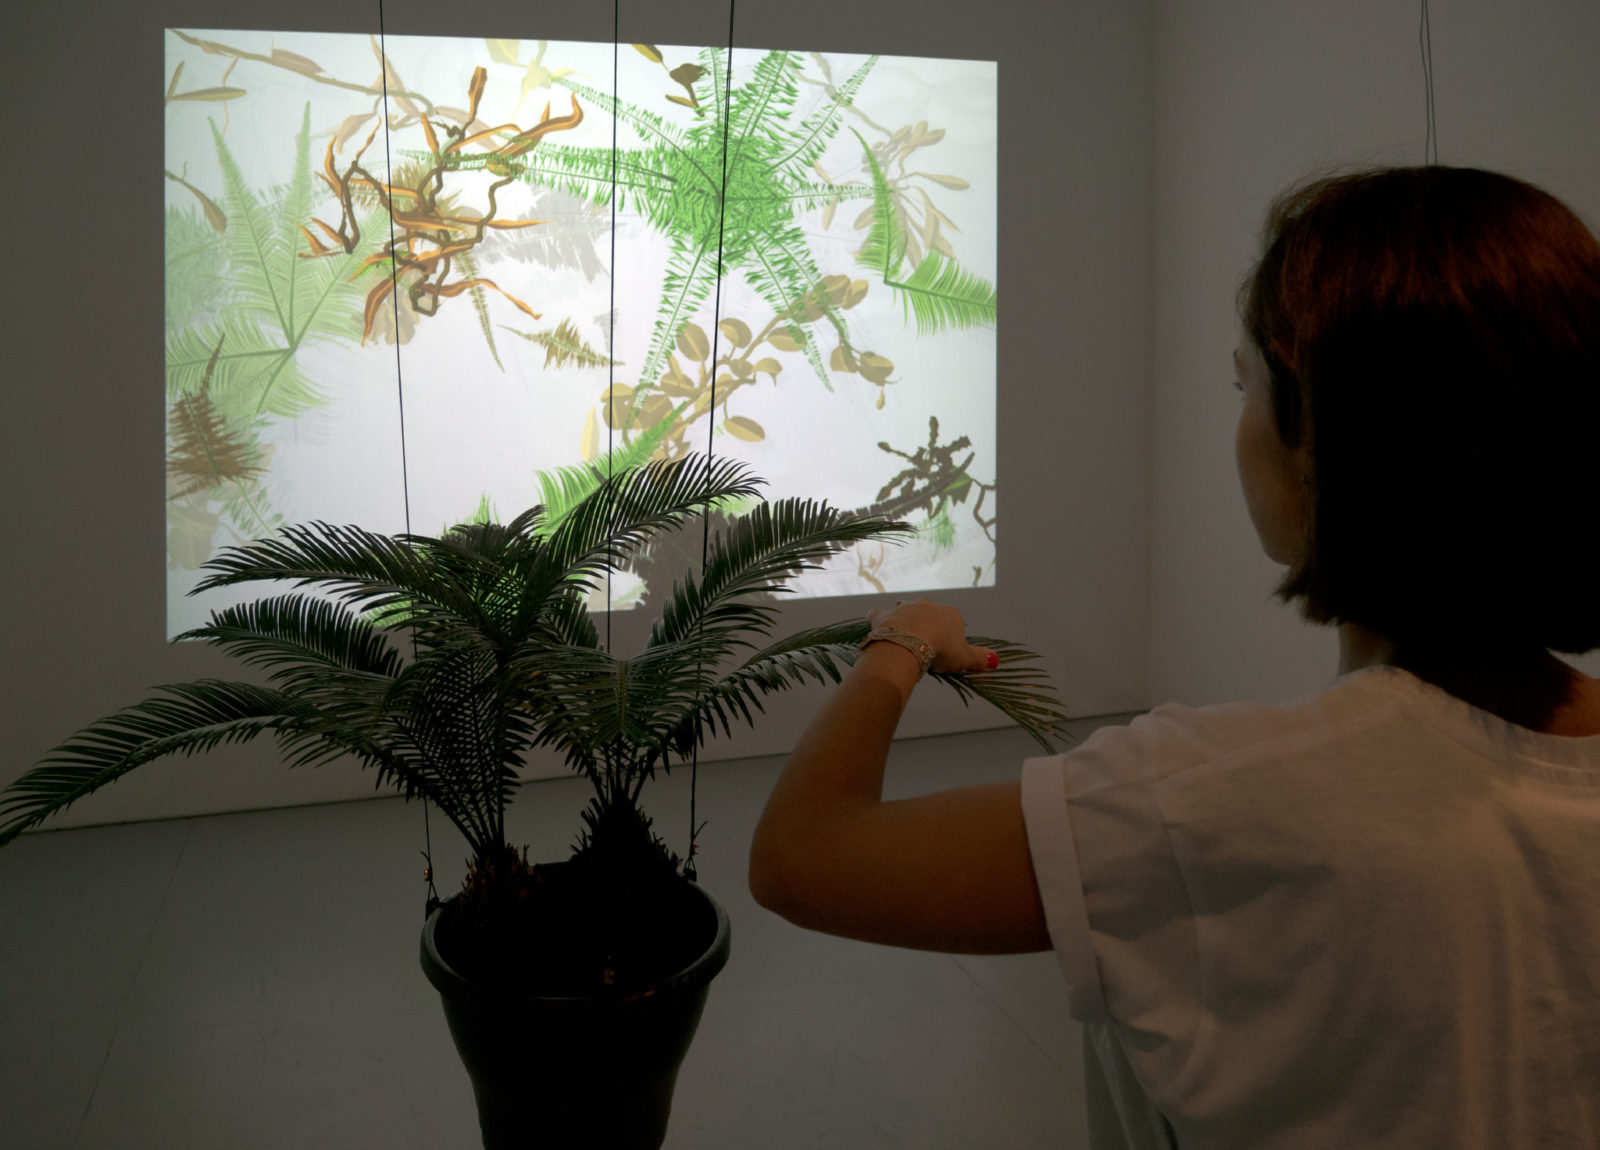 Woman touching a hanging plant with abstract art in background